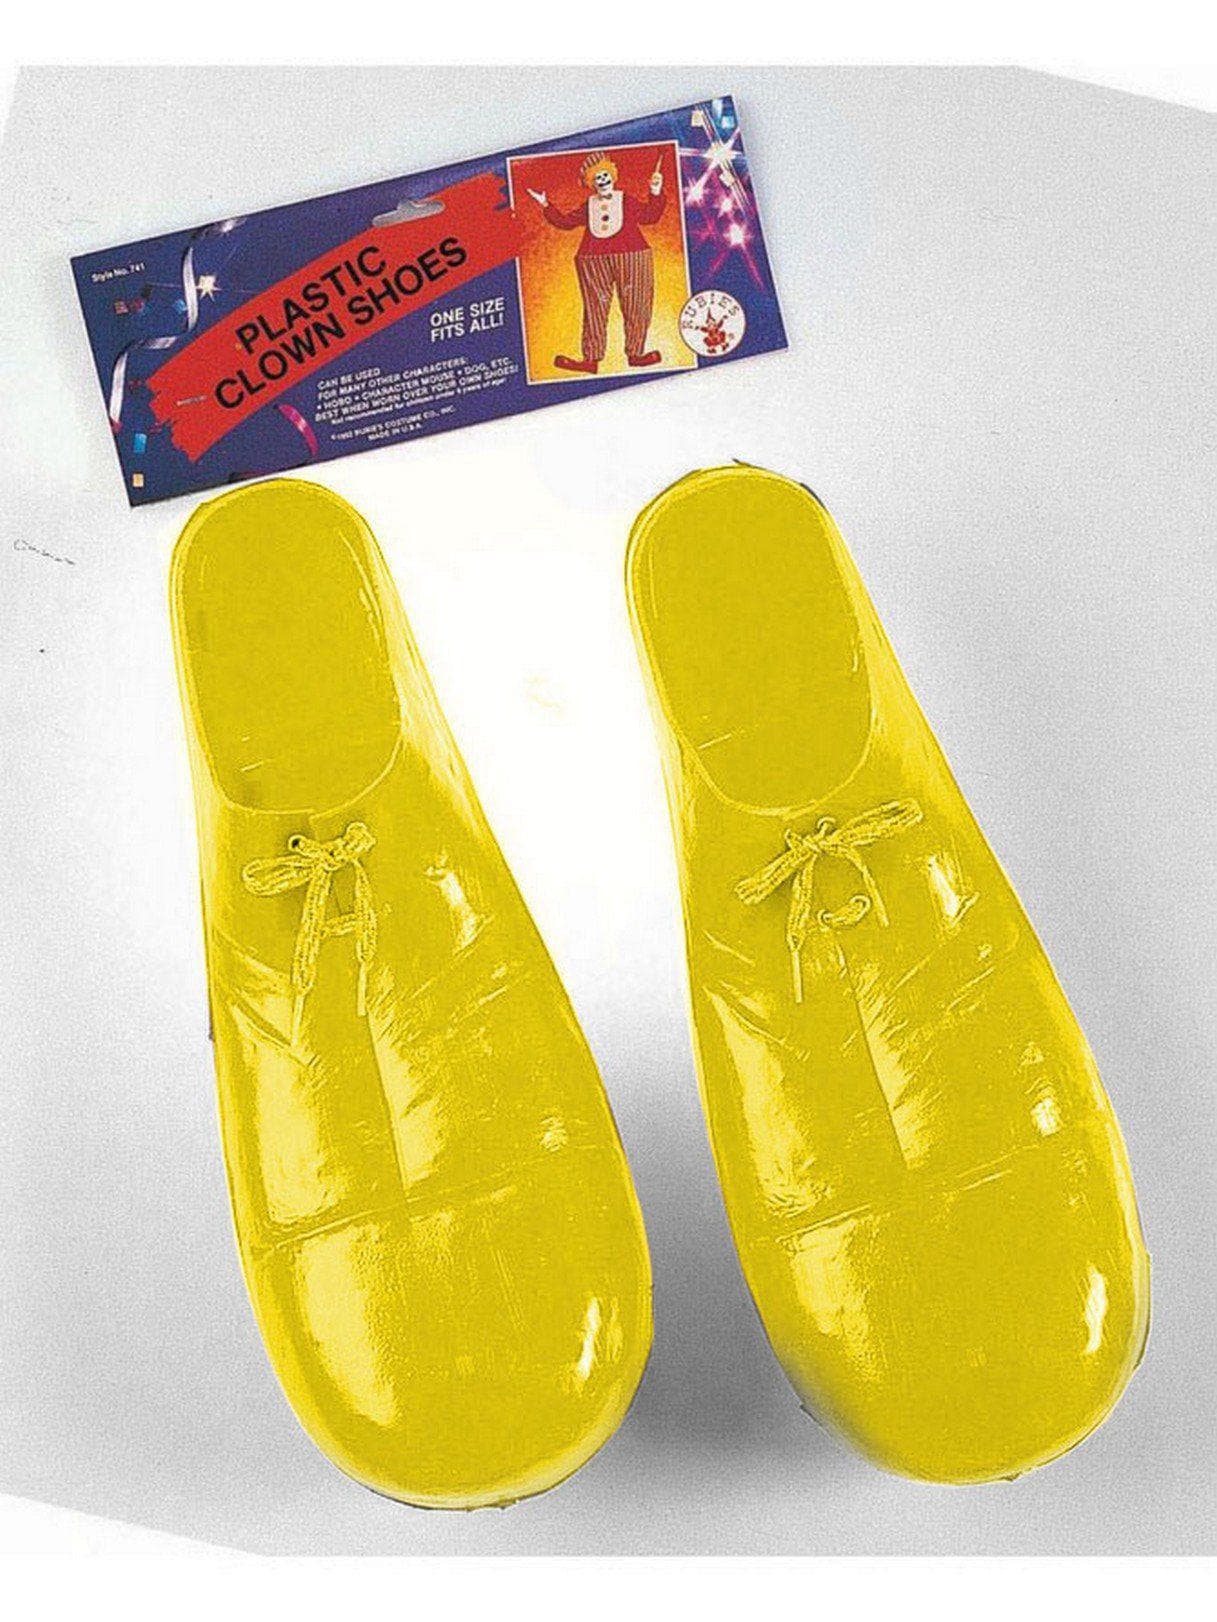 Yellow Child Clown Shoes - costumes.com